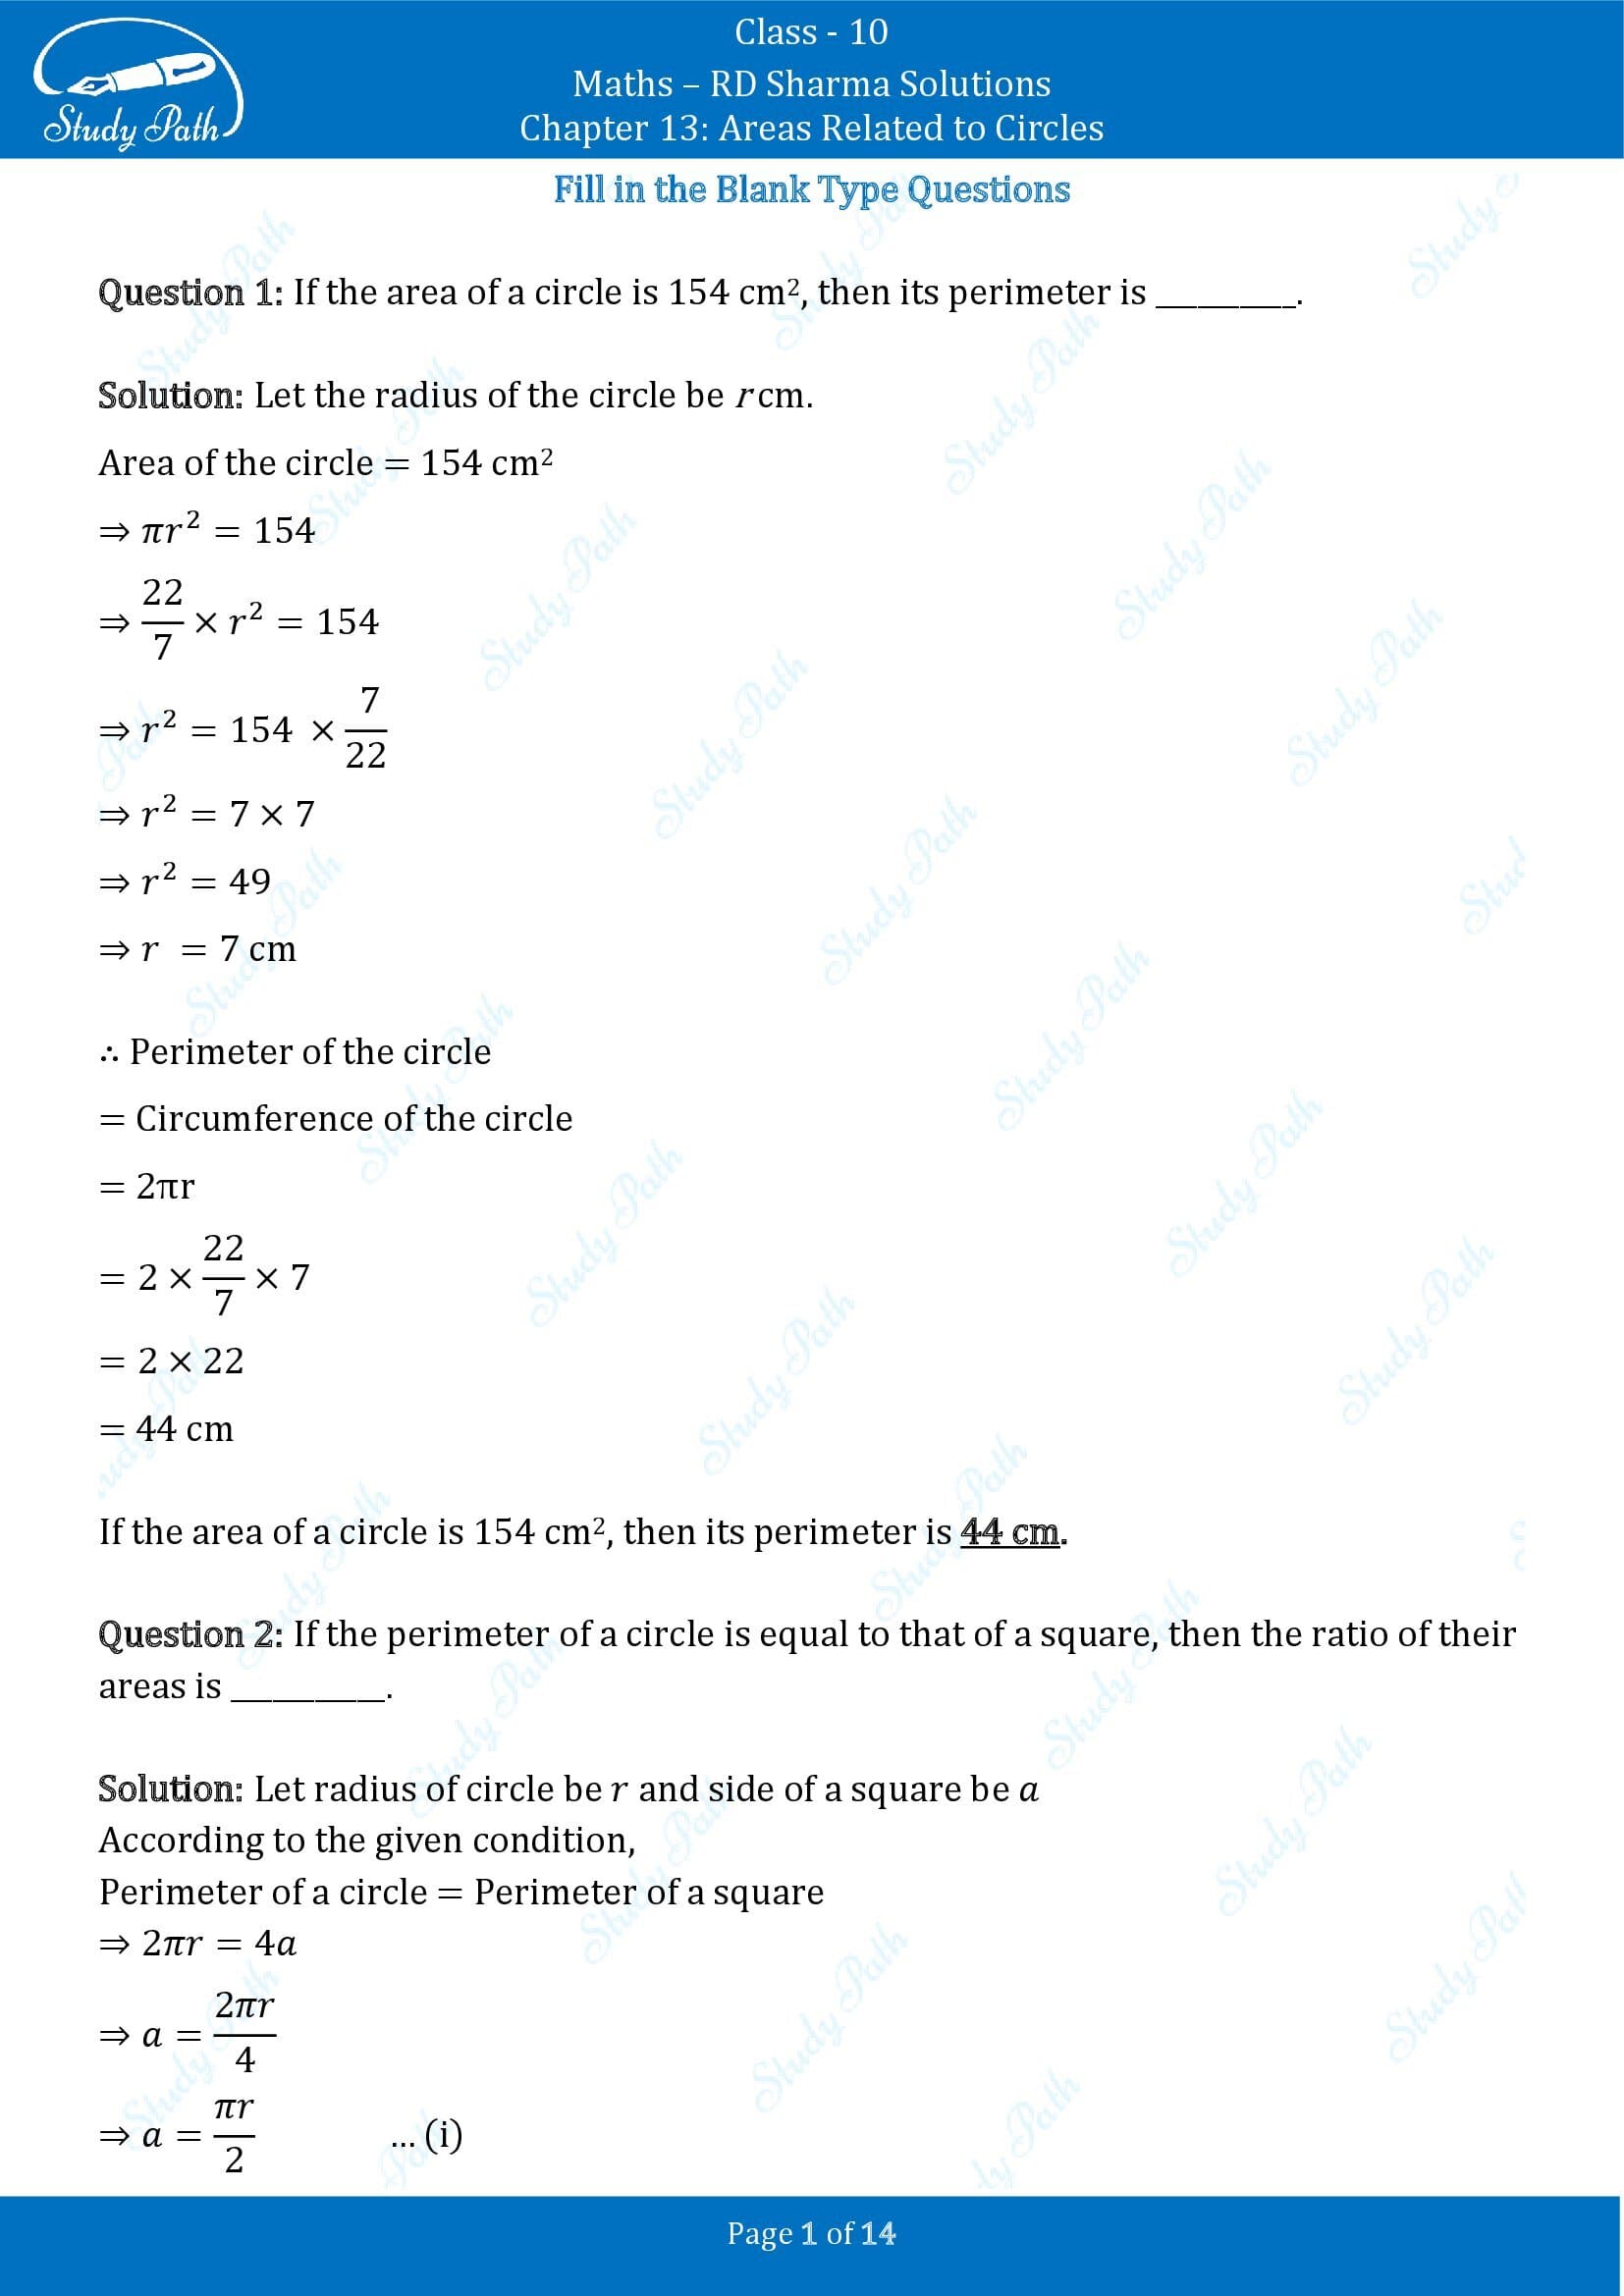 RD Sharma Solutions Class 10 Chapter 13 Areas Related to Circles Fill in the Blank Type Questions FBQs 00001